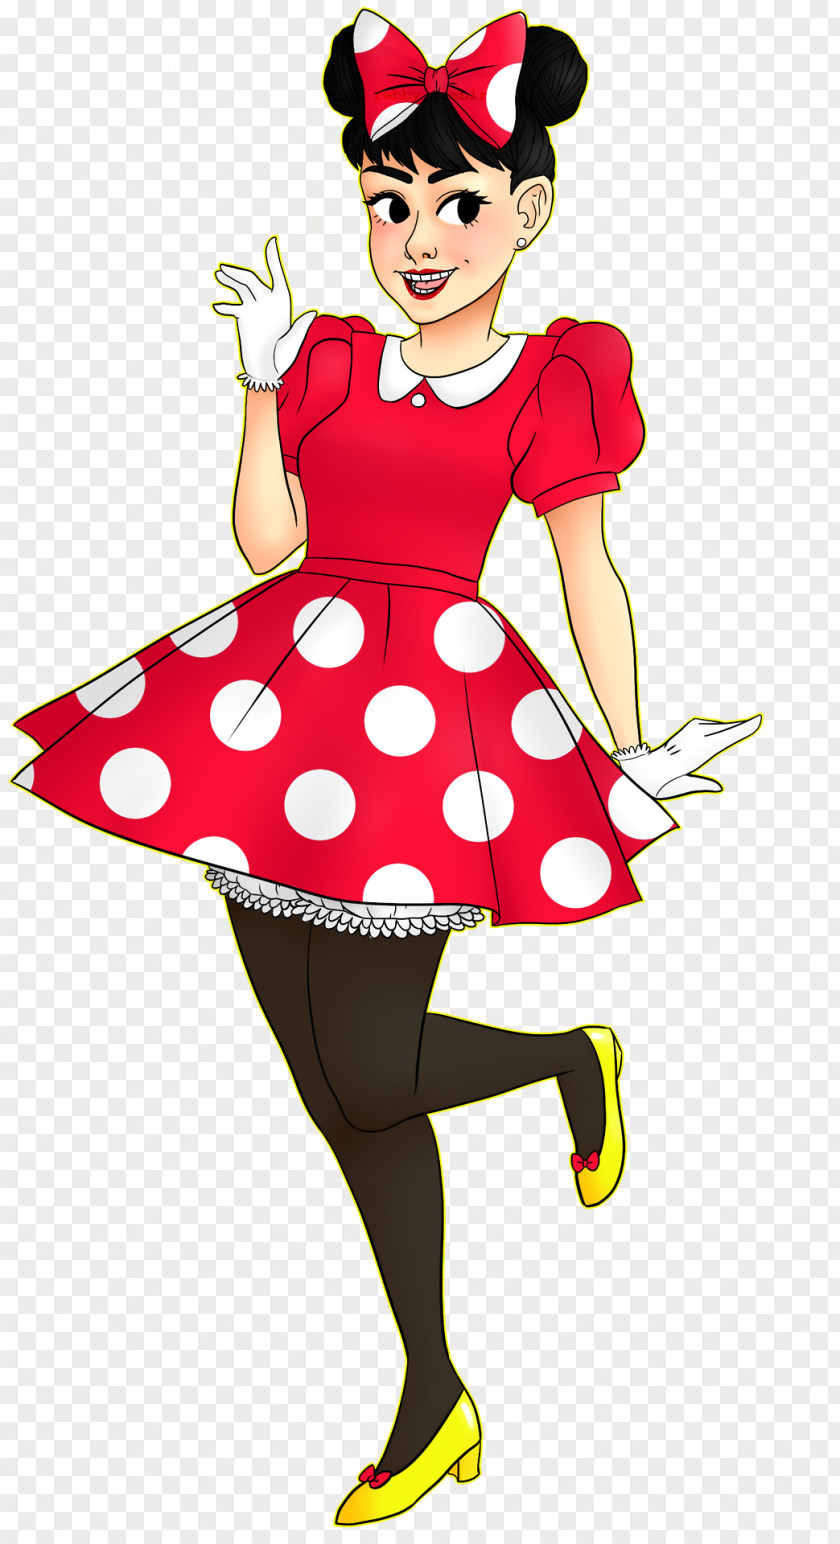 Minnie Mouse Clothing Costume Design PNG